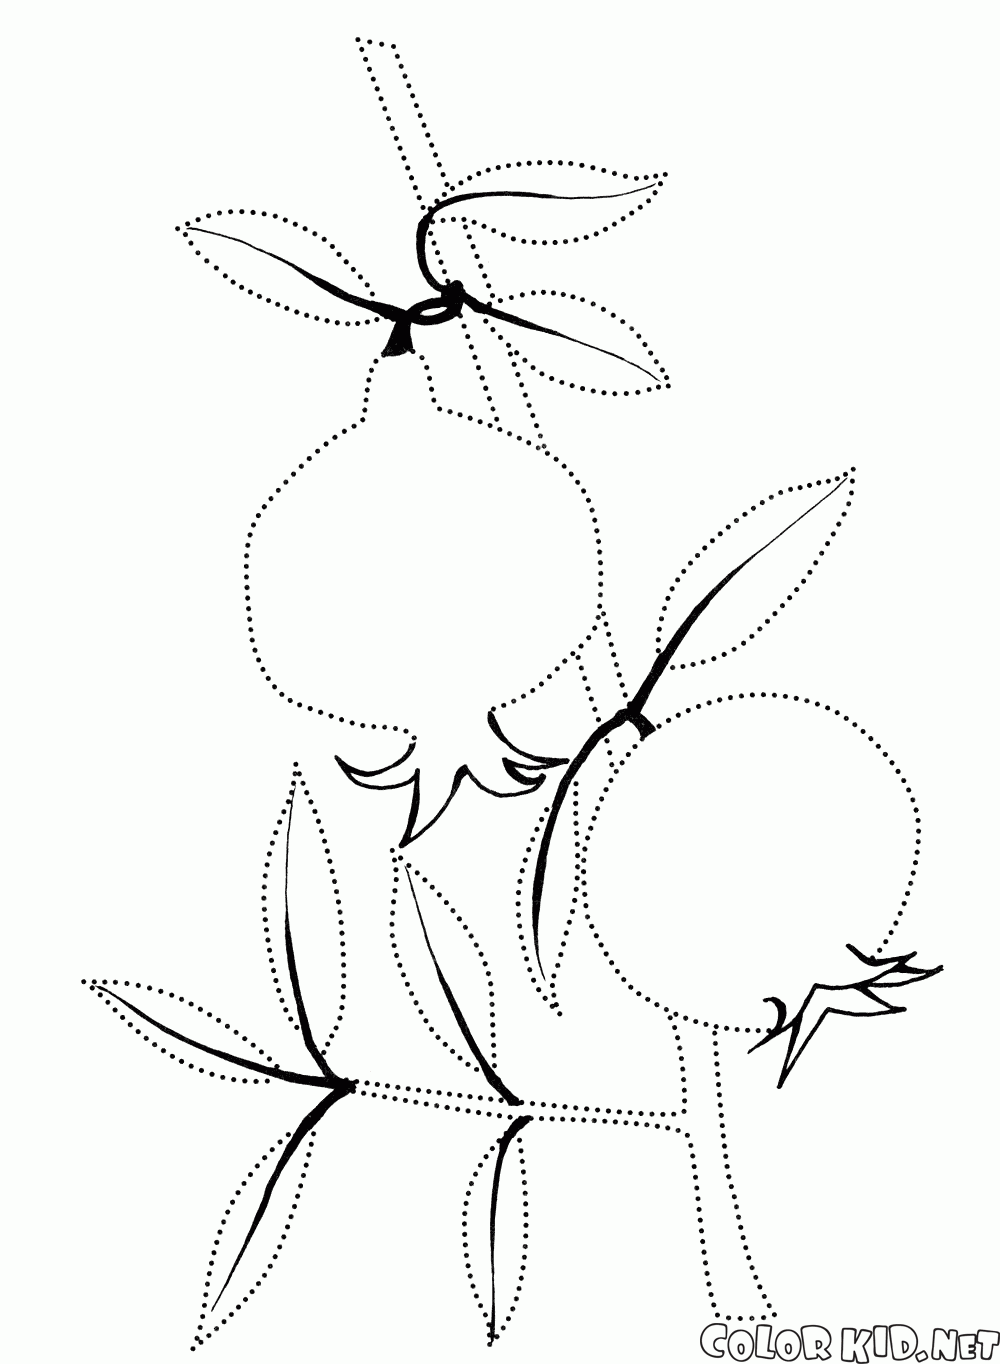 Coloring page - Pomegranate branch